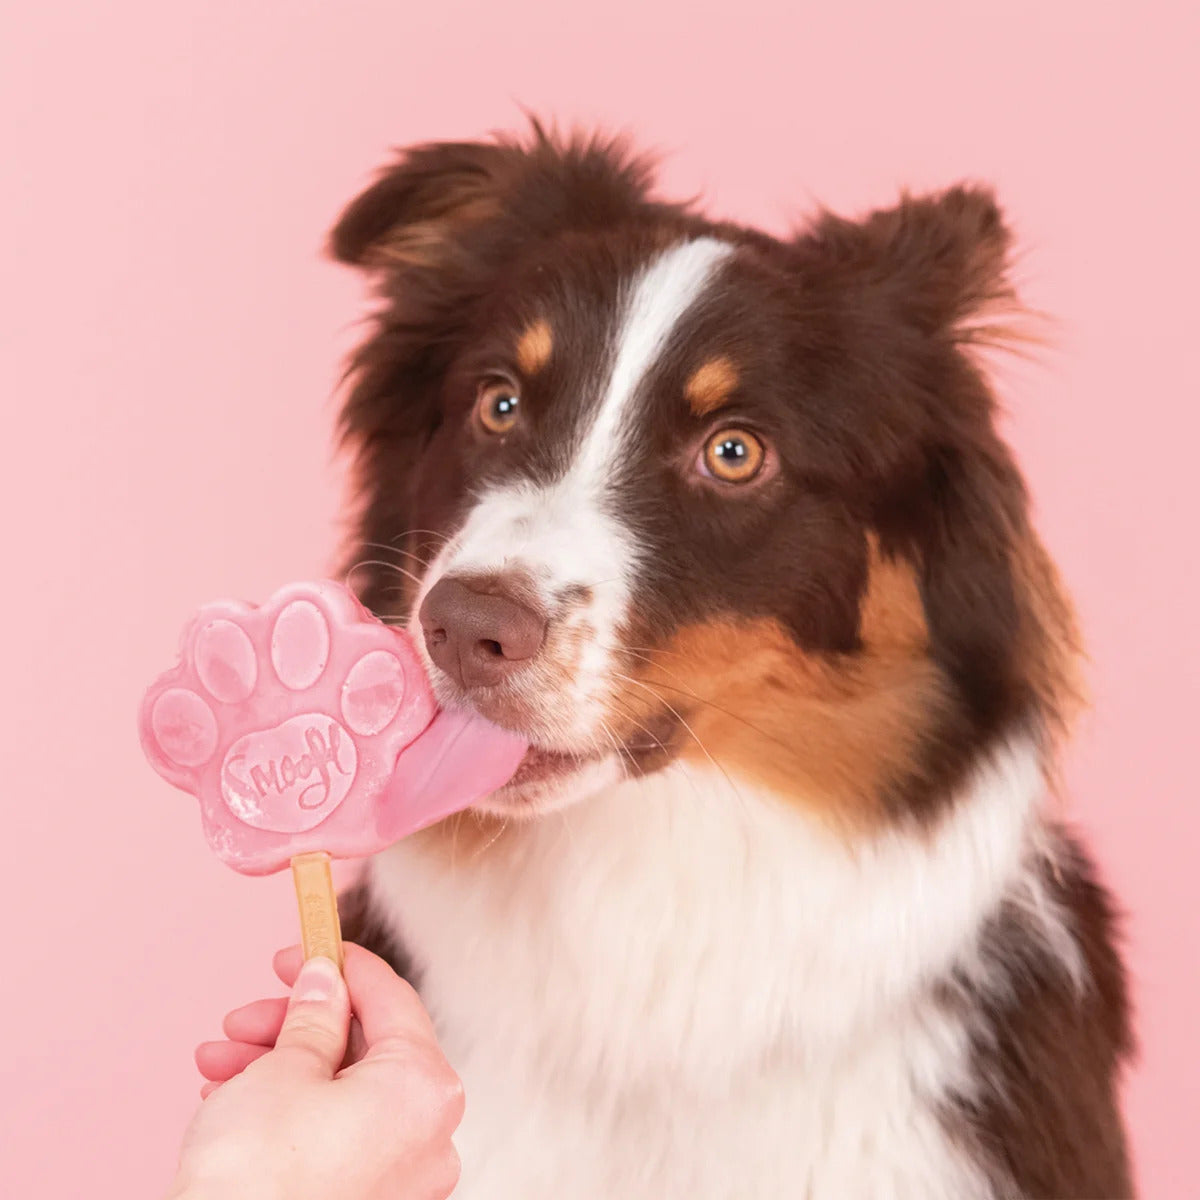 Ice Cream Mix for Dogs - Watermelon